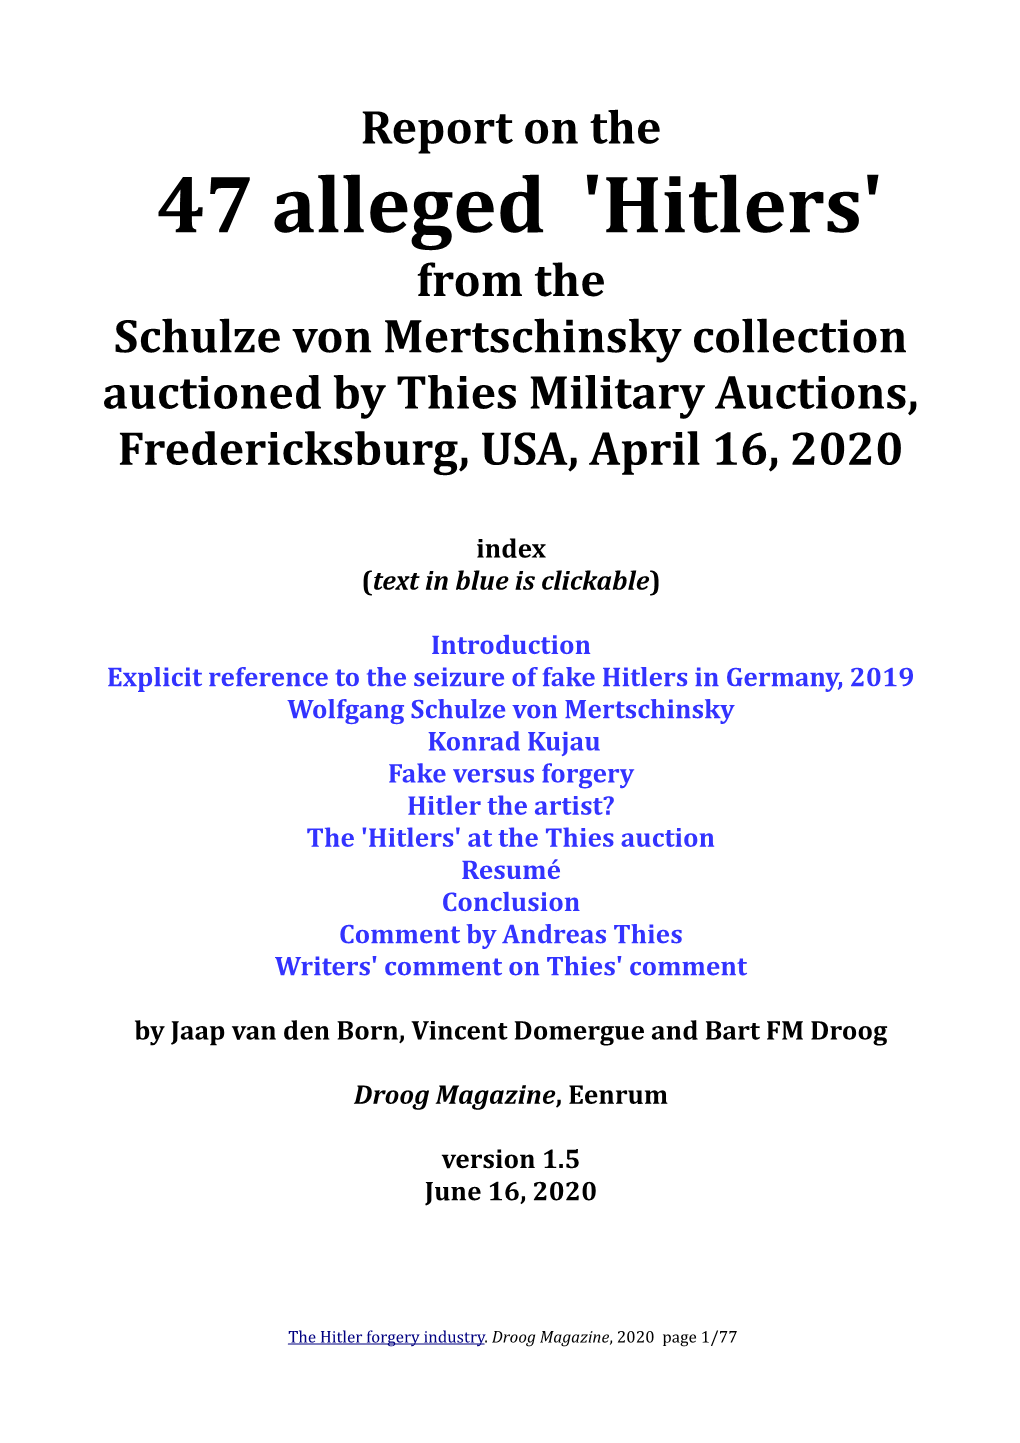 47 Alleged 'Hitlers' from the Schulze Von Mertschinsky Collection Auctioned by Thies Military Auctions, Fredericksburg, USA, April 16, 2020